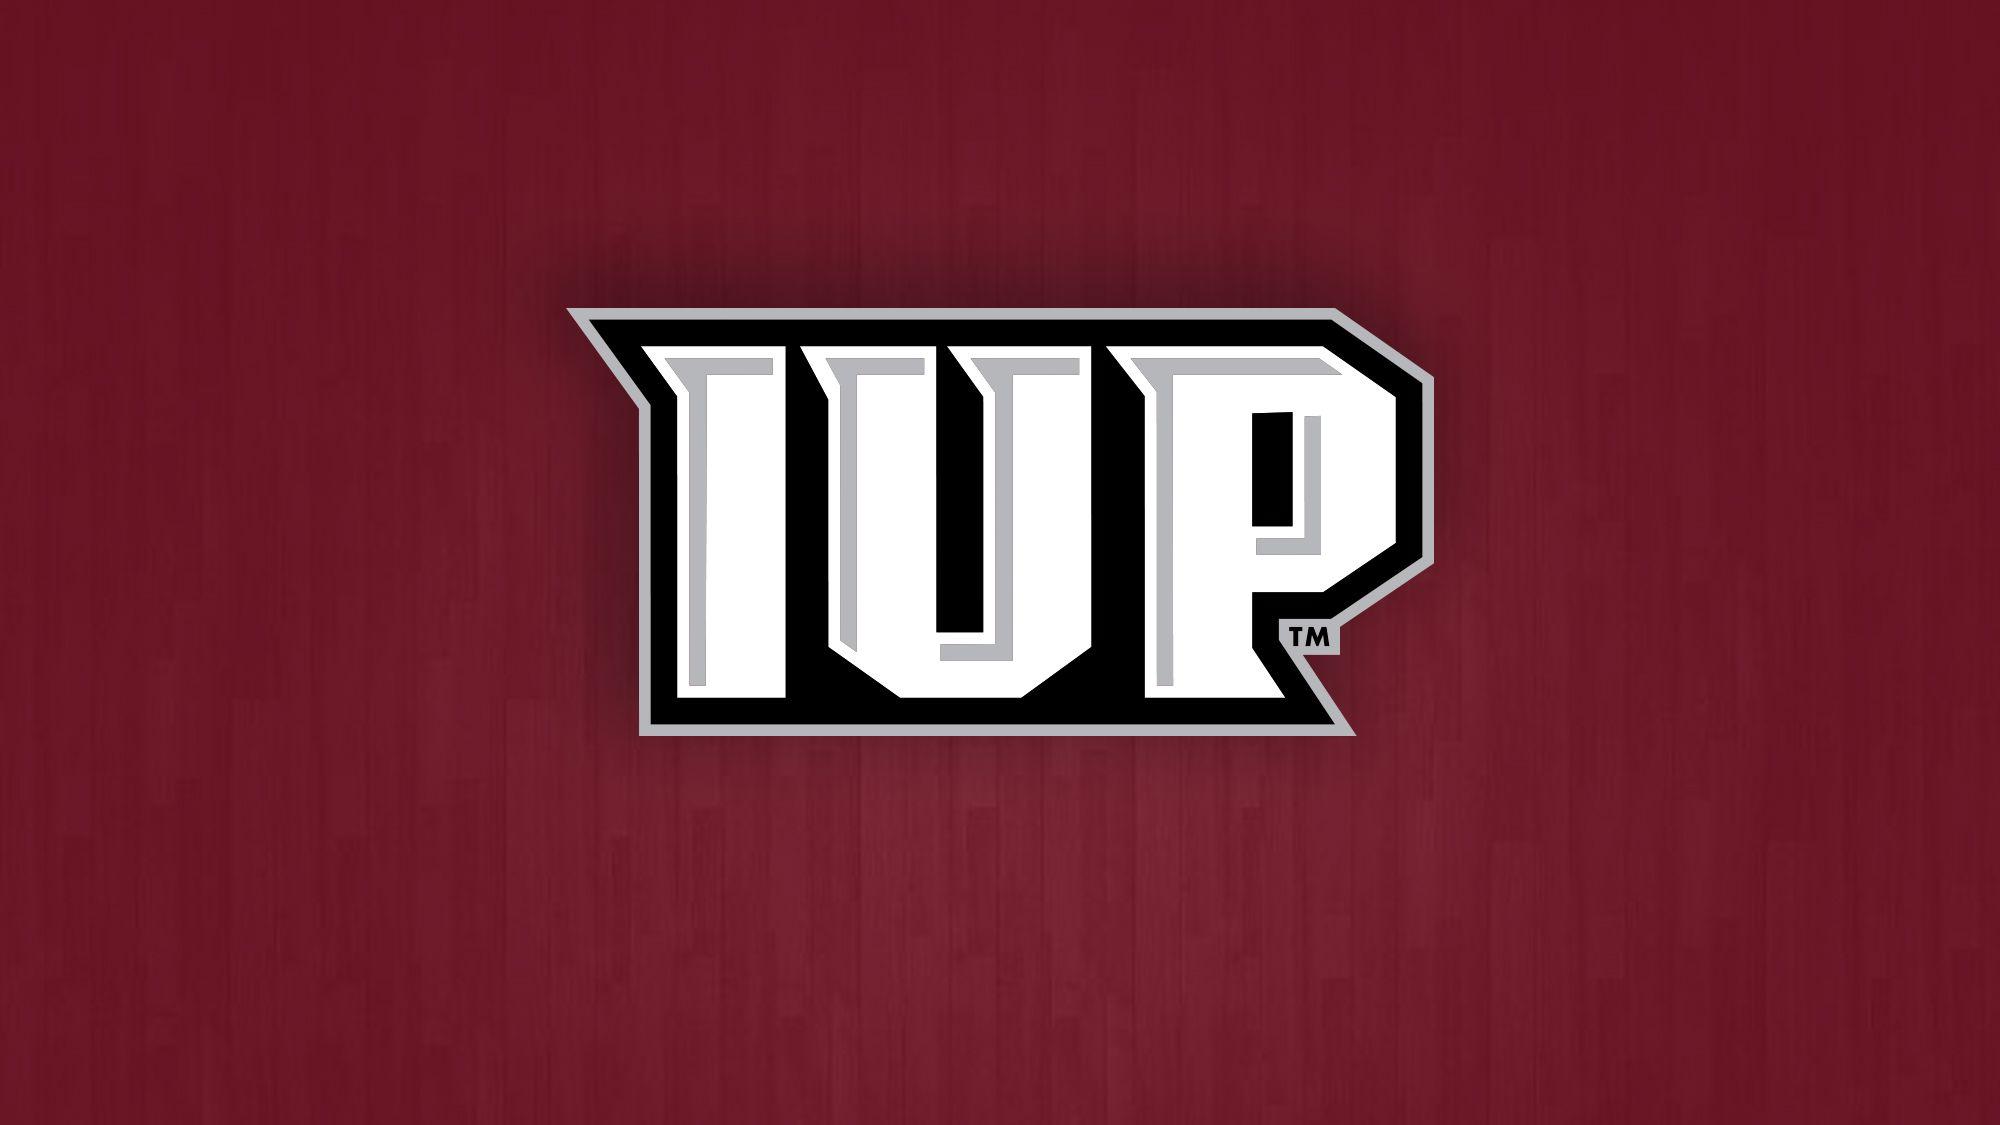 Indiana University Basketball Logo - Parking and location information for IUP Basketball games Saturday